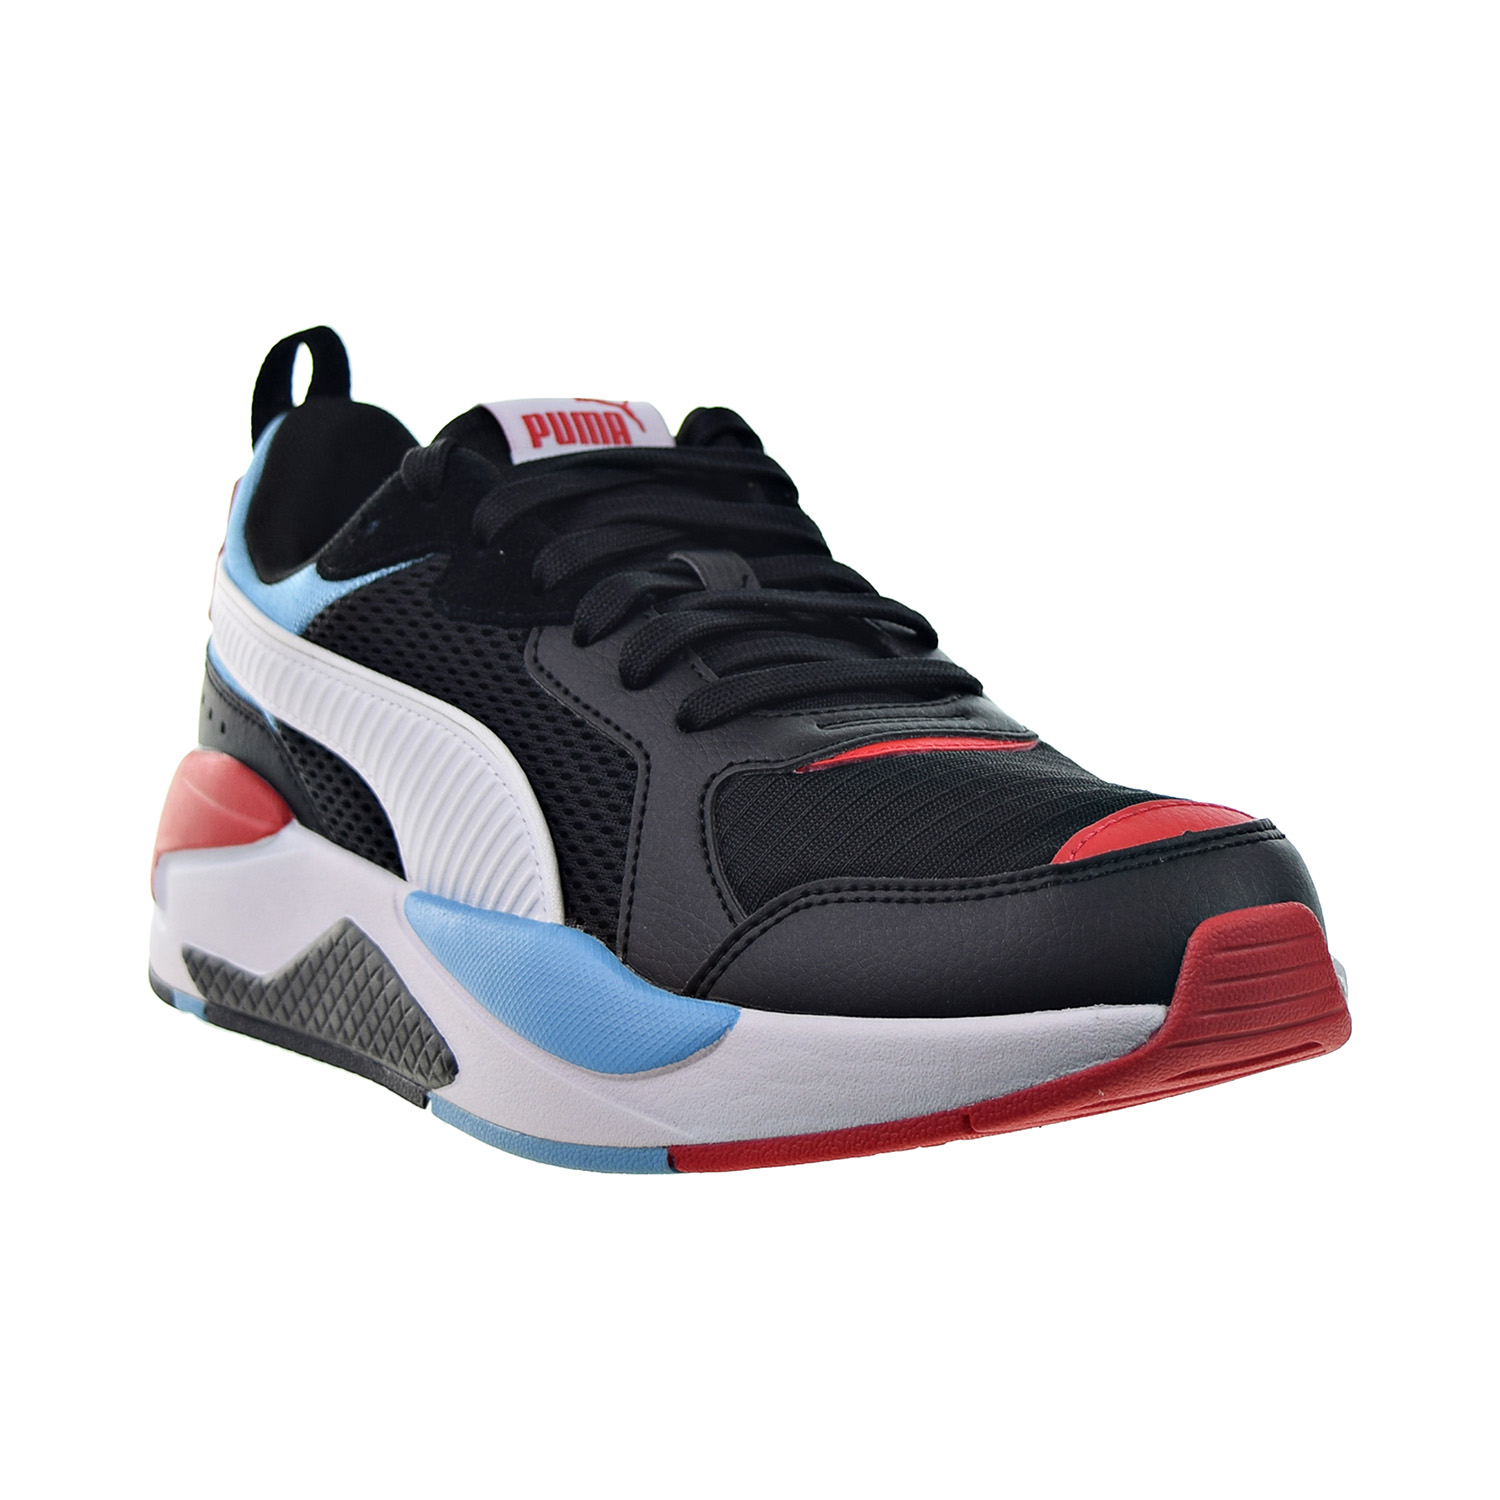 Puma X-Ray Color Block Men's Shoes Black-White-Blue-Red 373582-01 - image 2 of 6